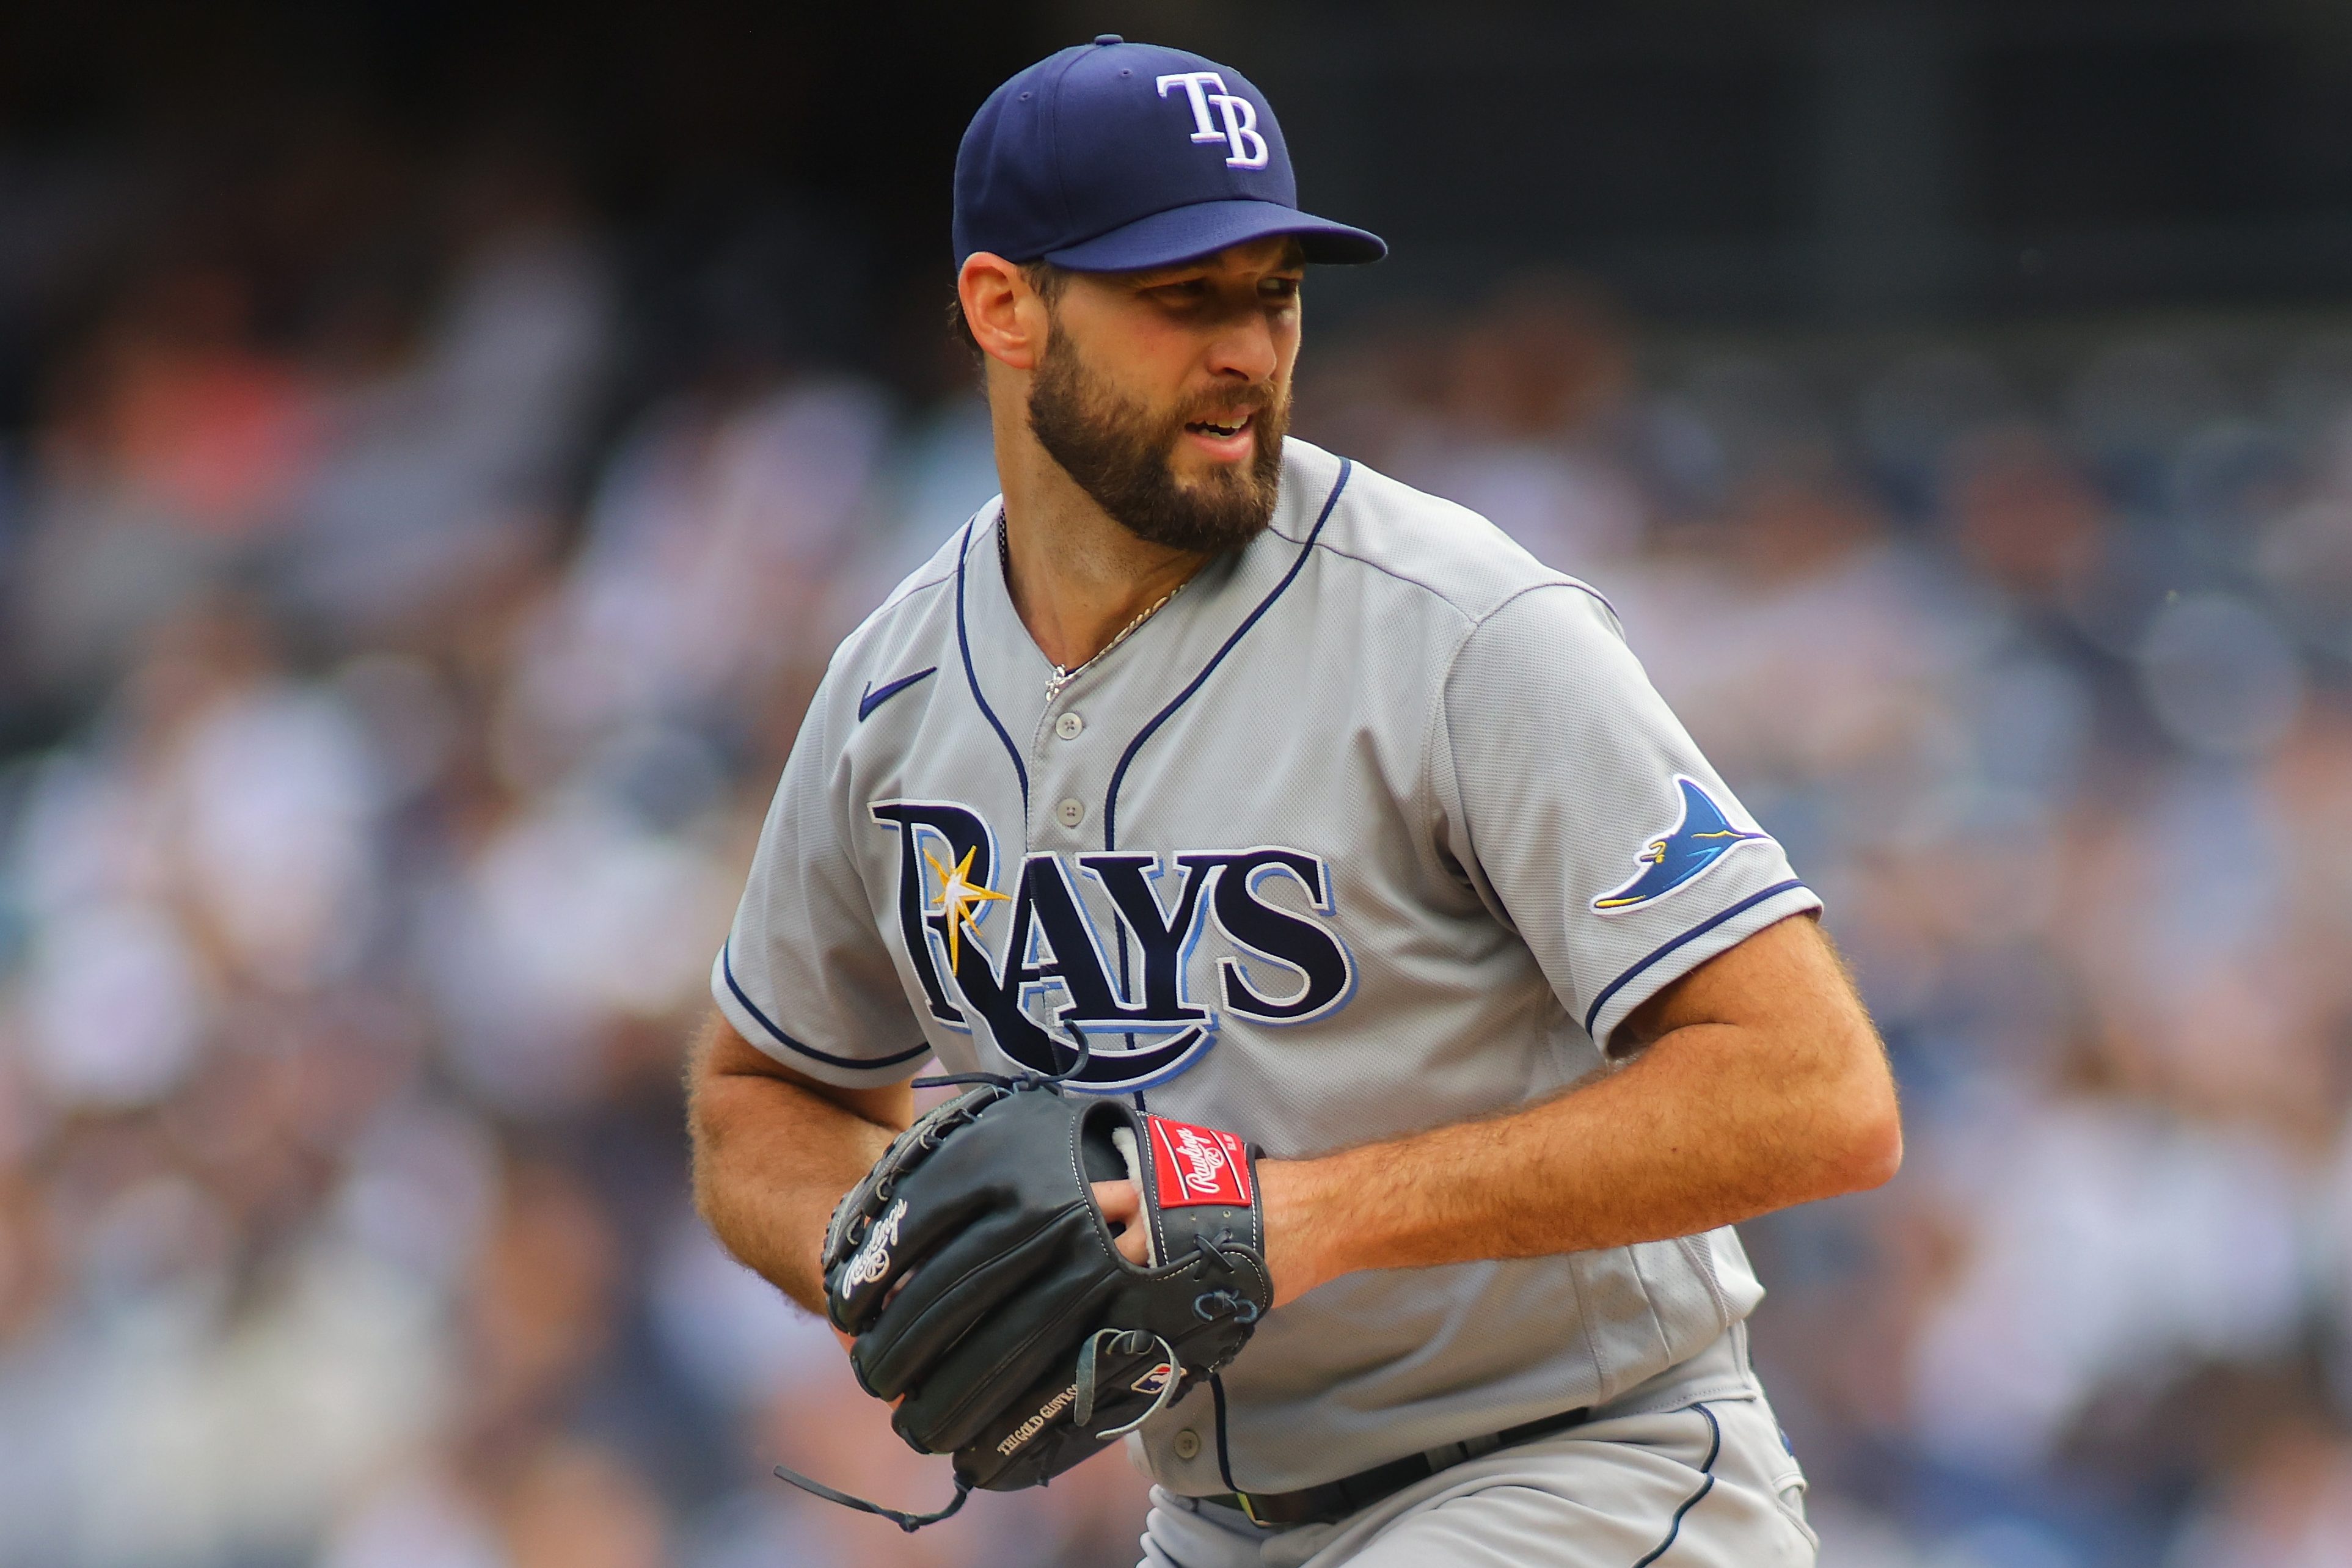 Michael Wacha of the Tampa Bay Rays pitches against the New York Yankees